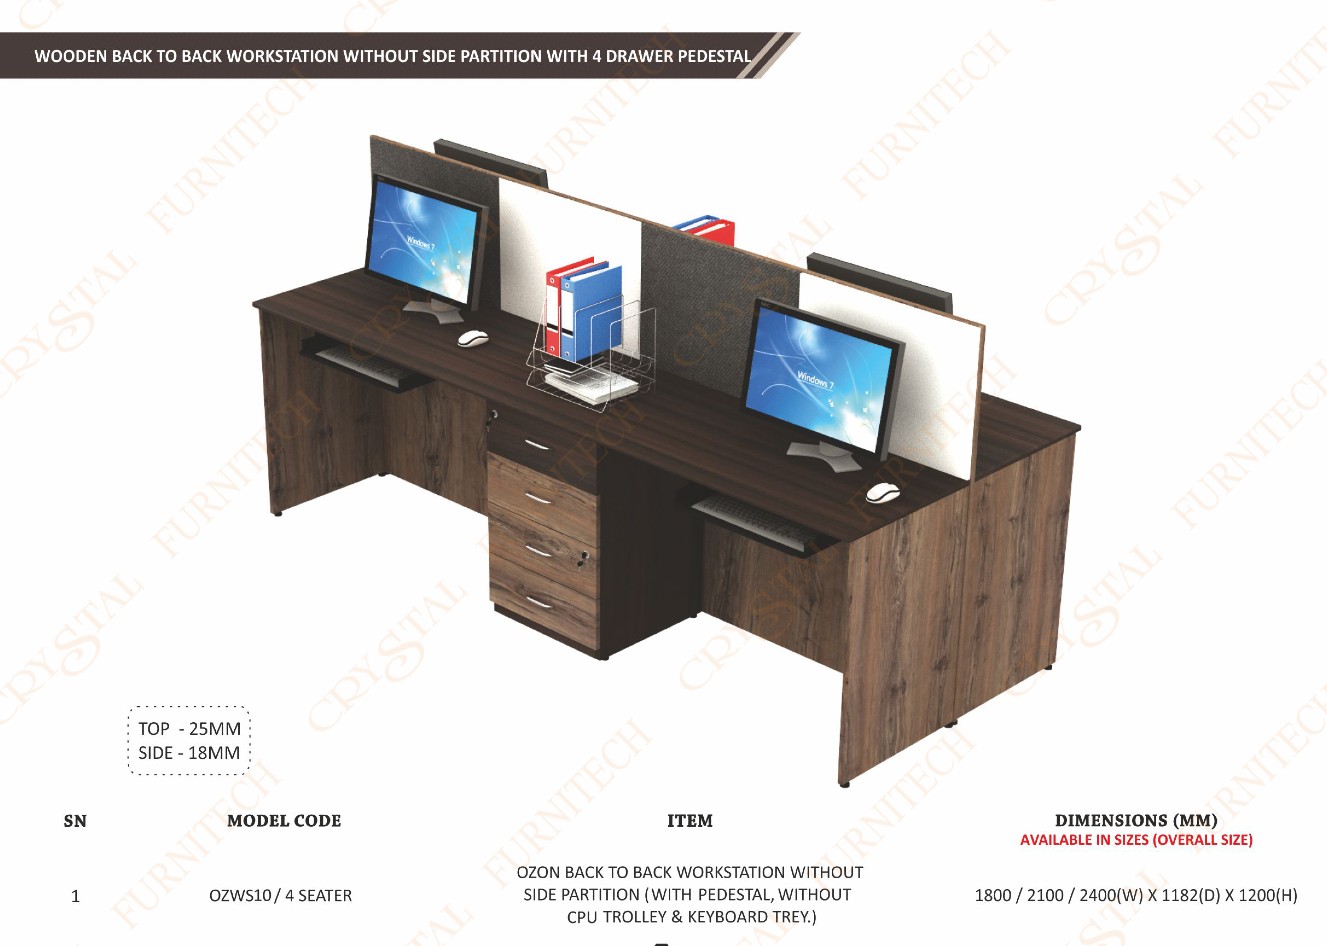 Wooden Back to Back Workstation without side partition